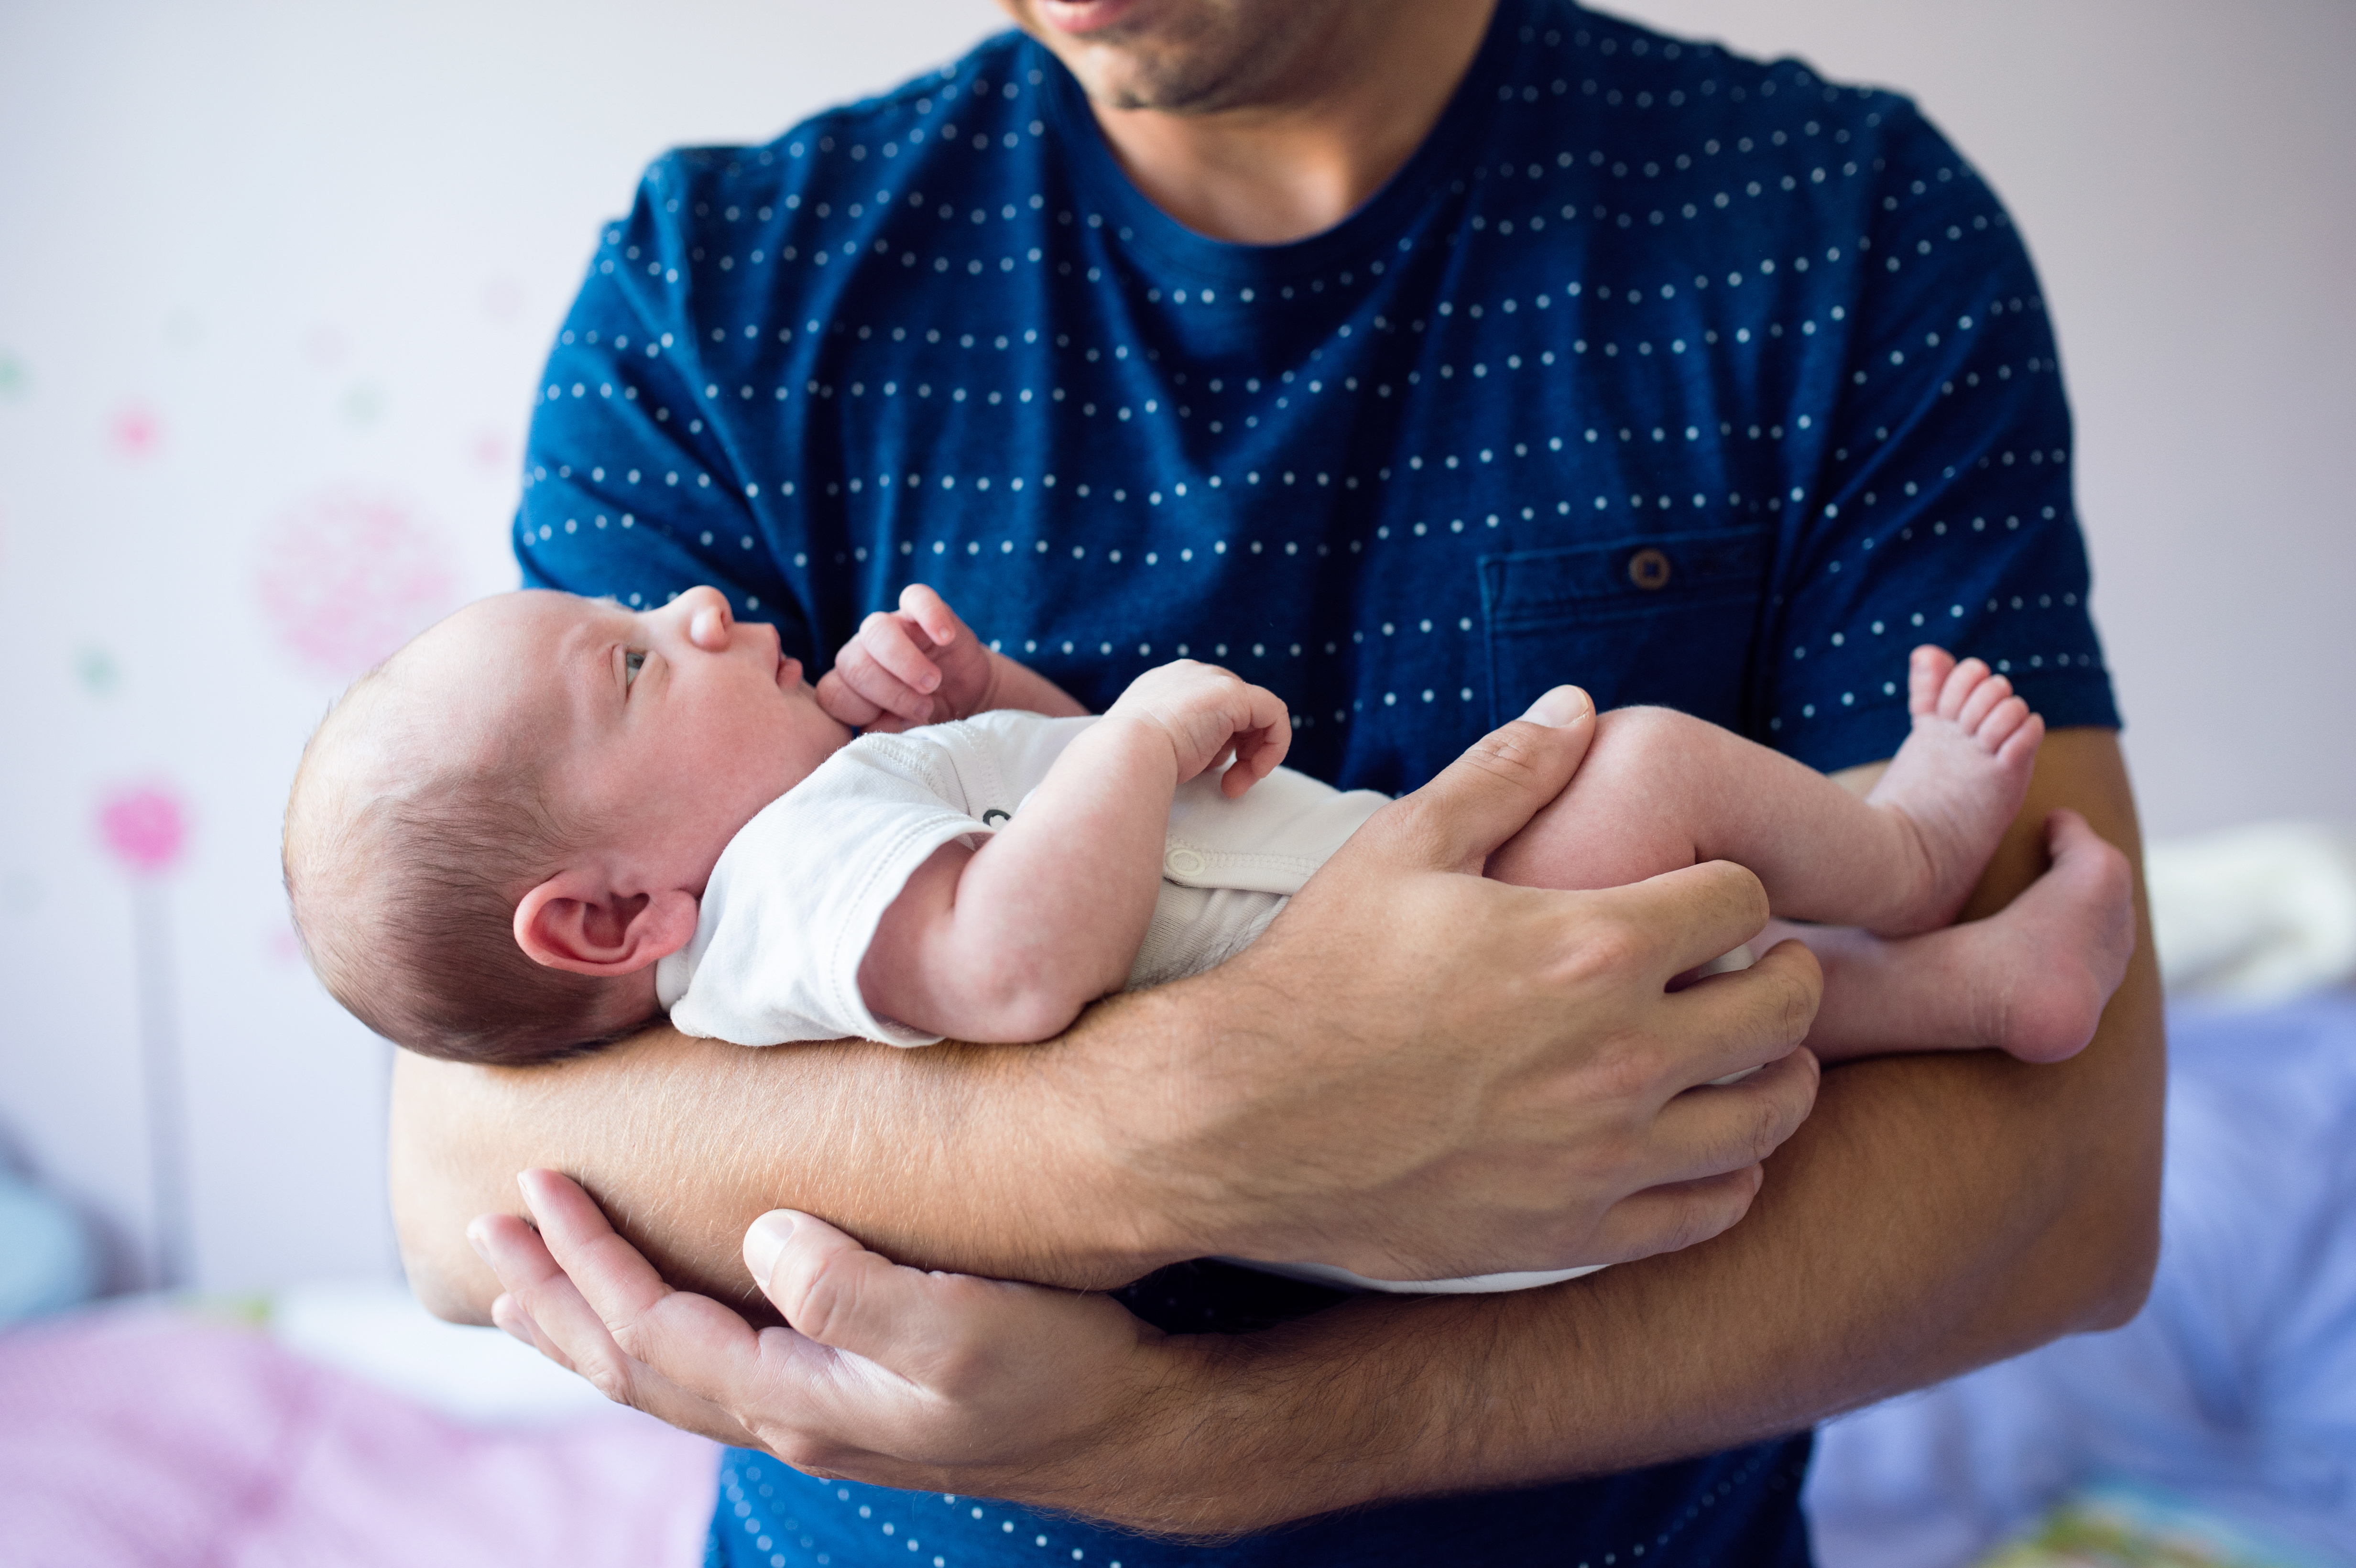 A man holding a baby | Source: Shutterstock